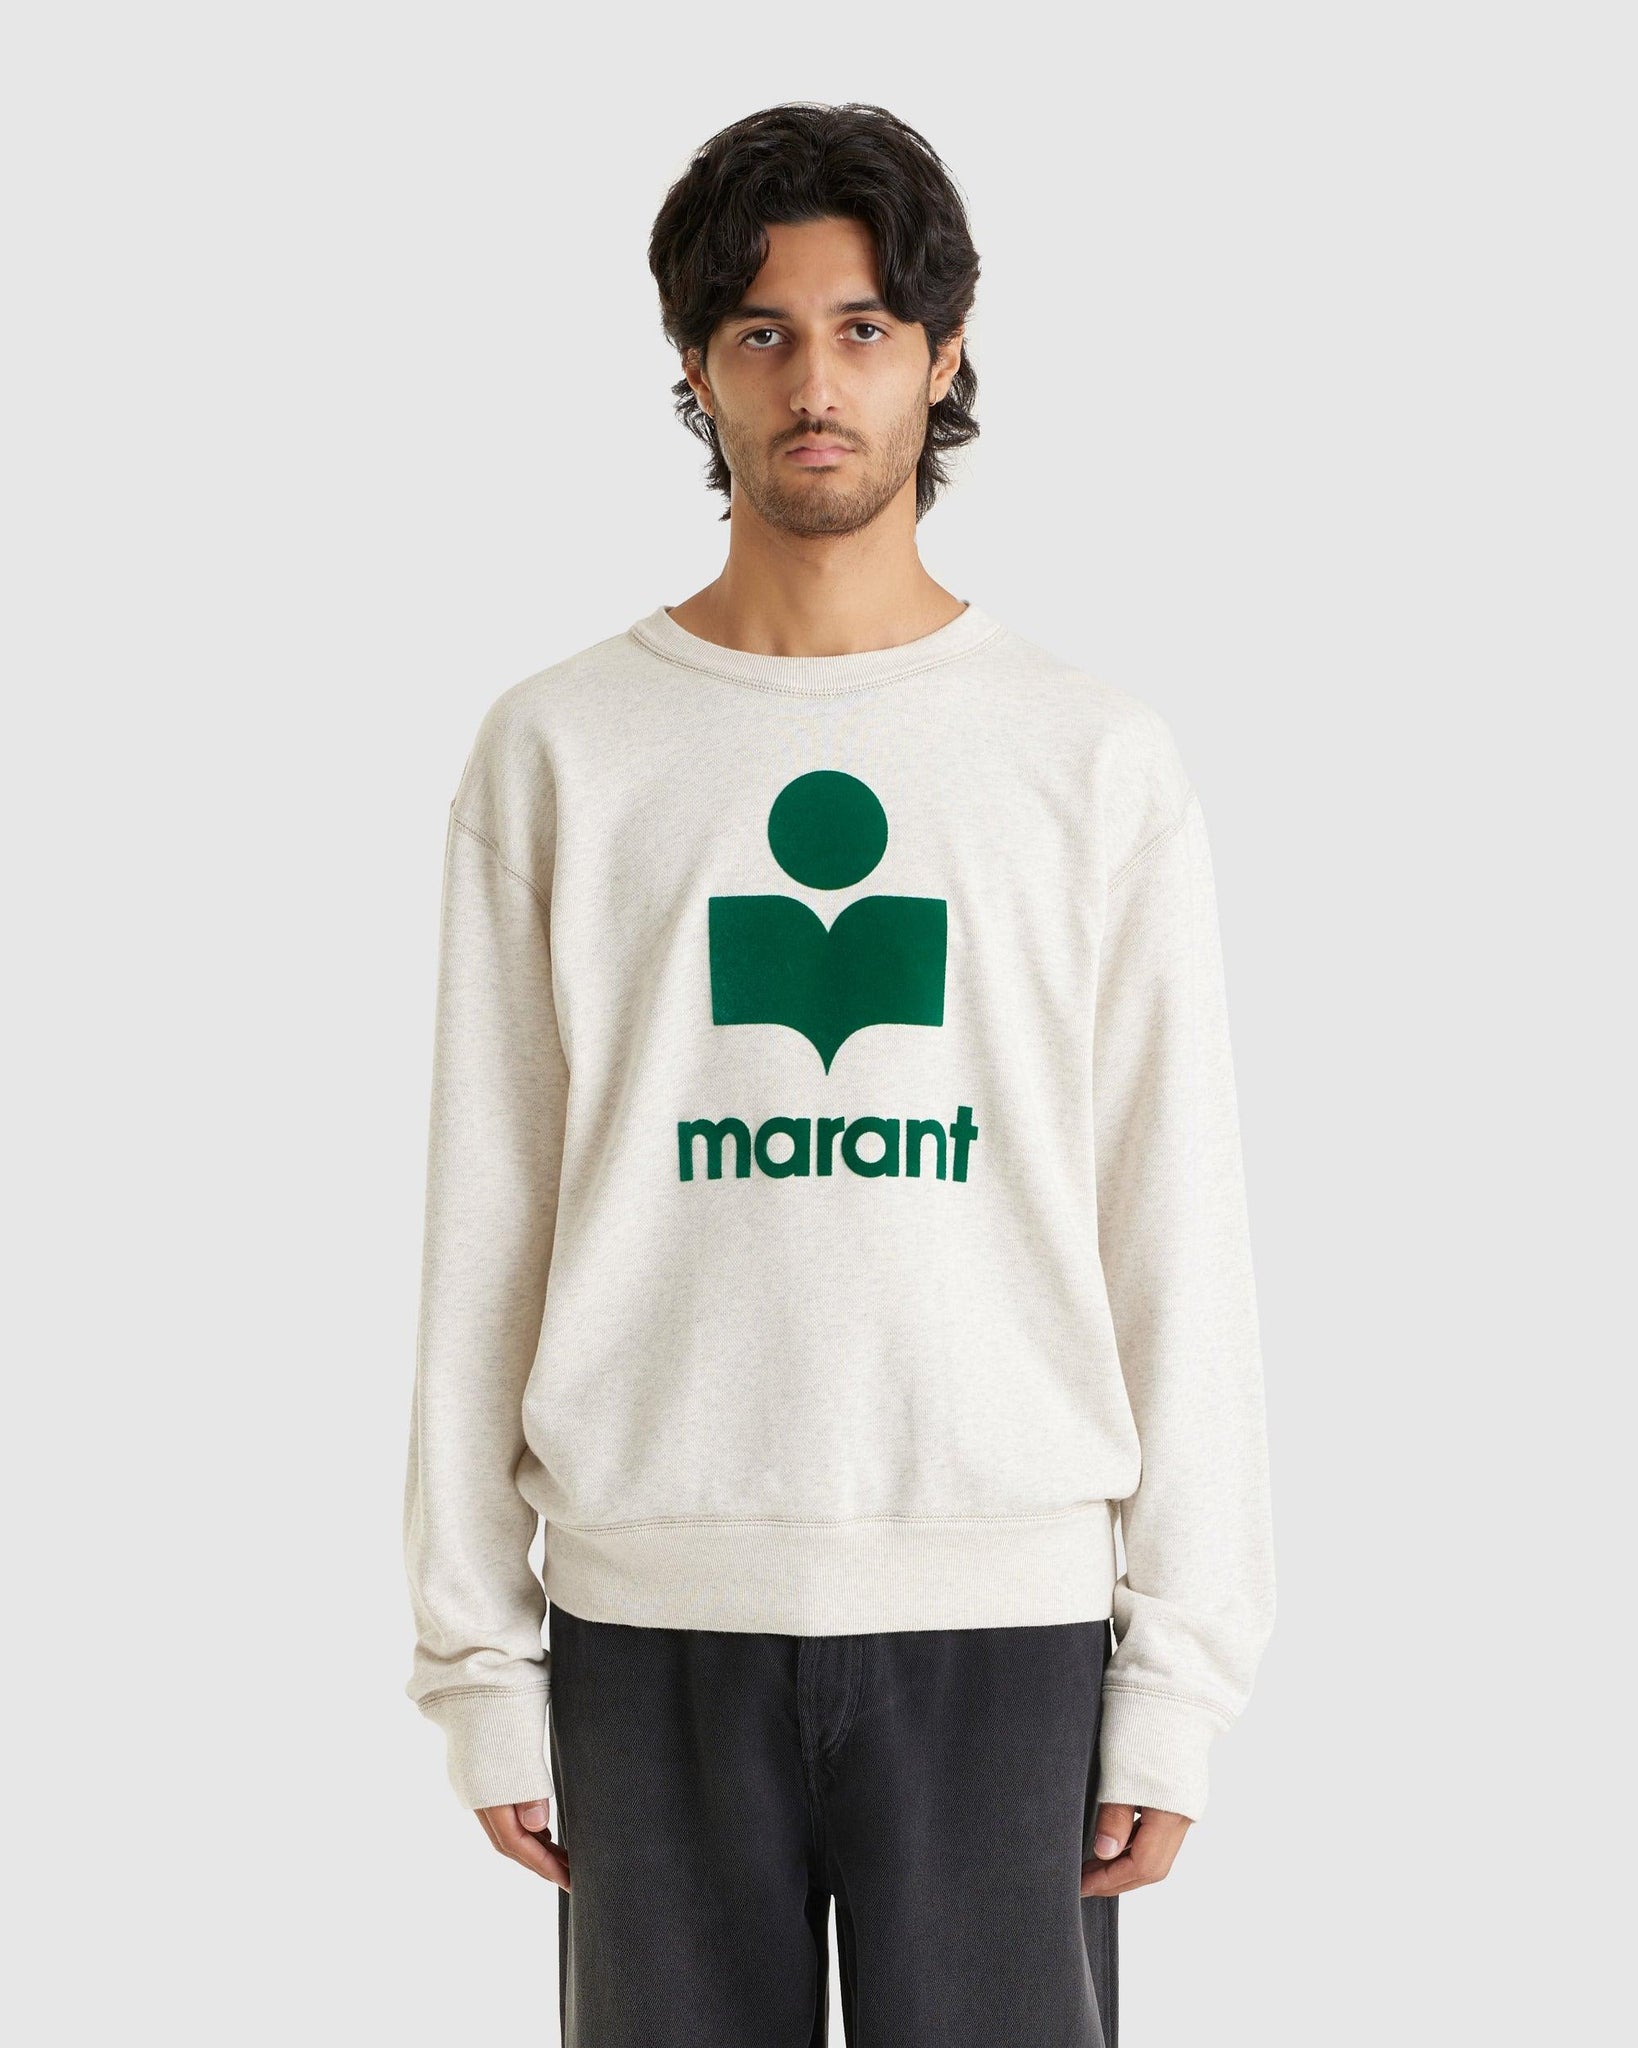 Mikoy Sweatshirt Ecru/Emerald - {{ collection.title }} - Chinatown Country Club 